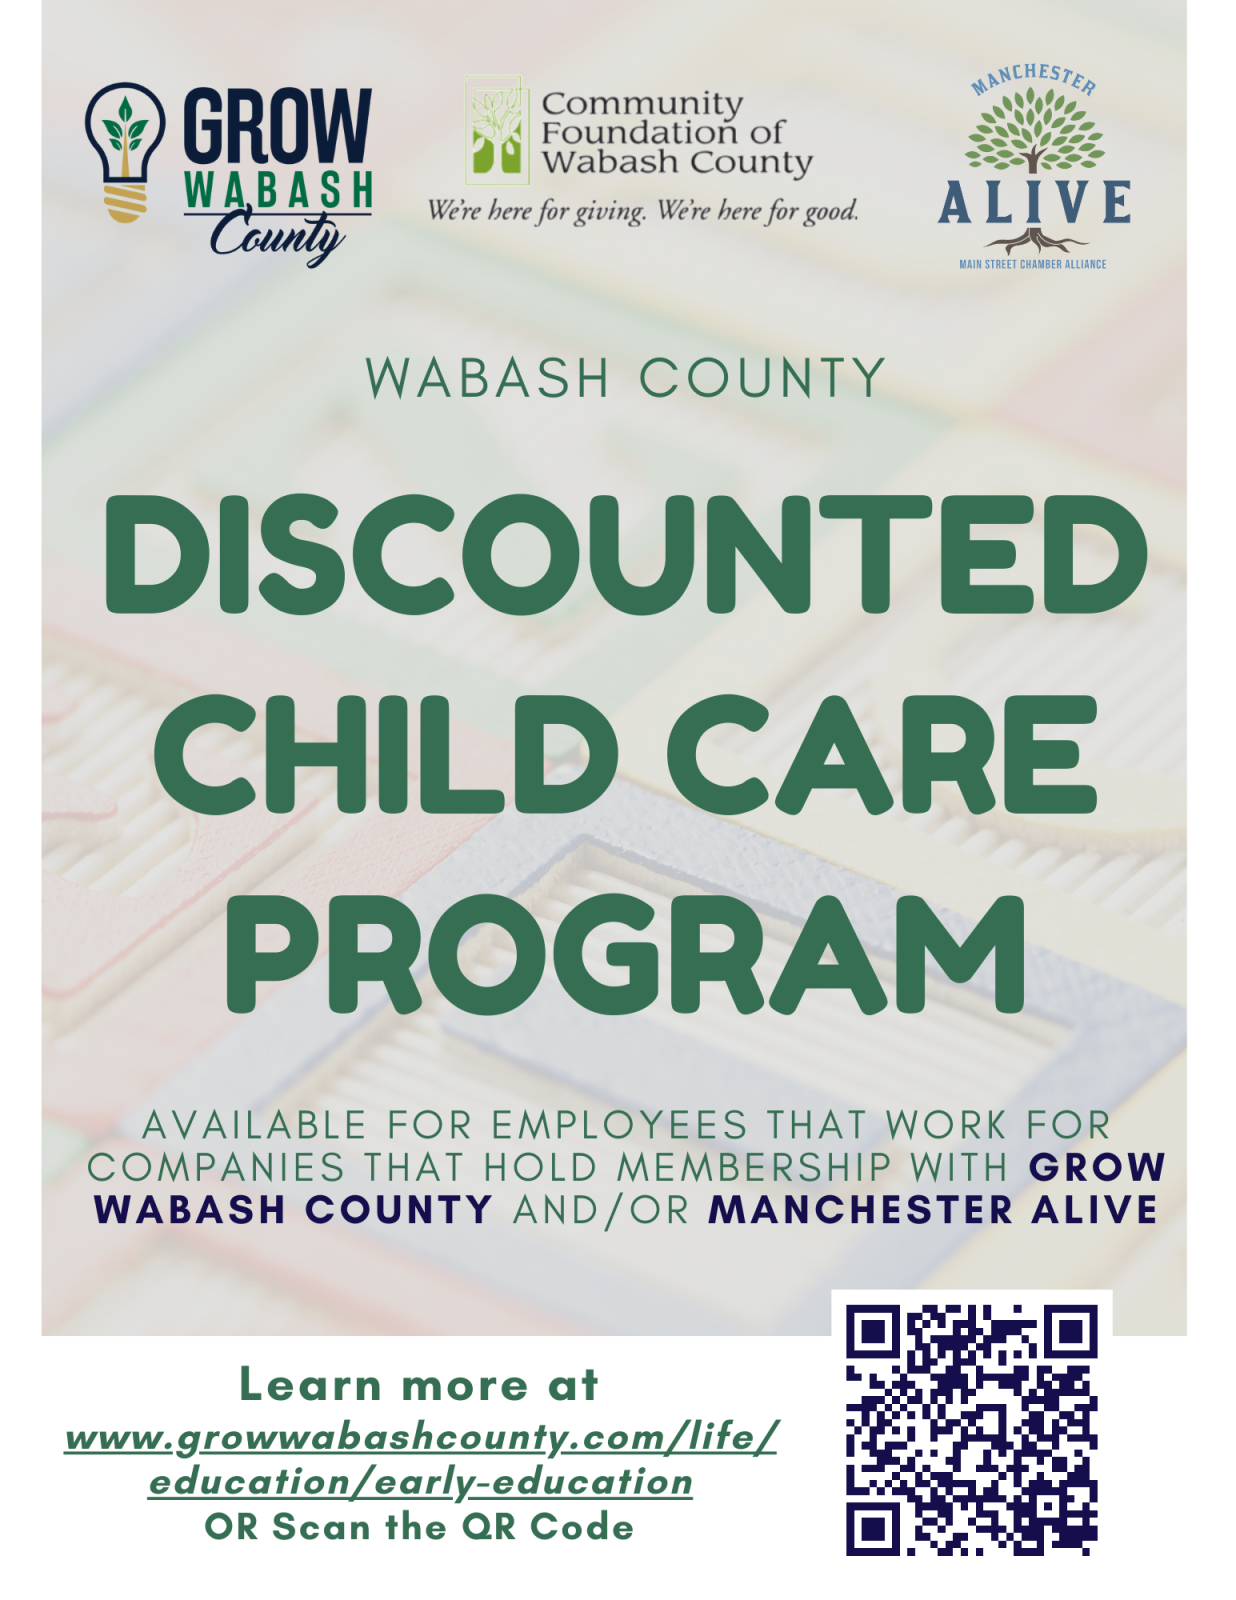 Community Foundation of Wabash County Receives ARPA Grant to Make Childcare More Affordable Photo